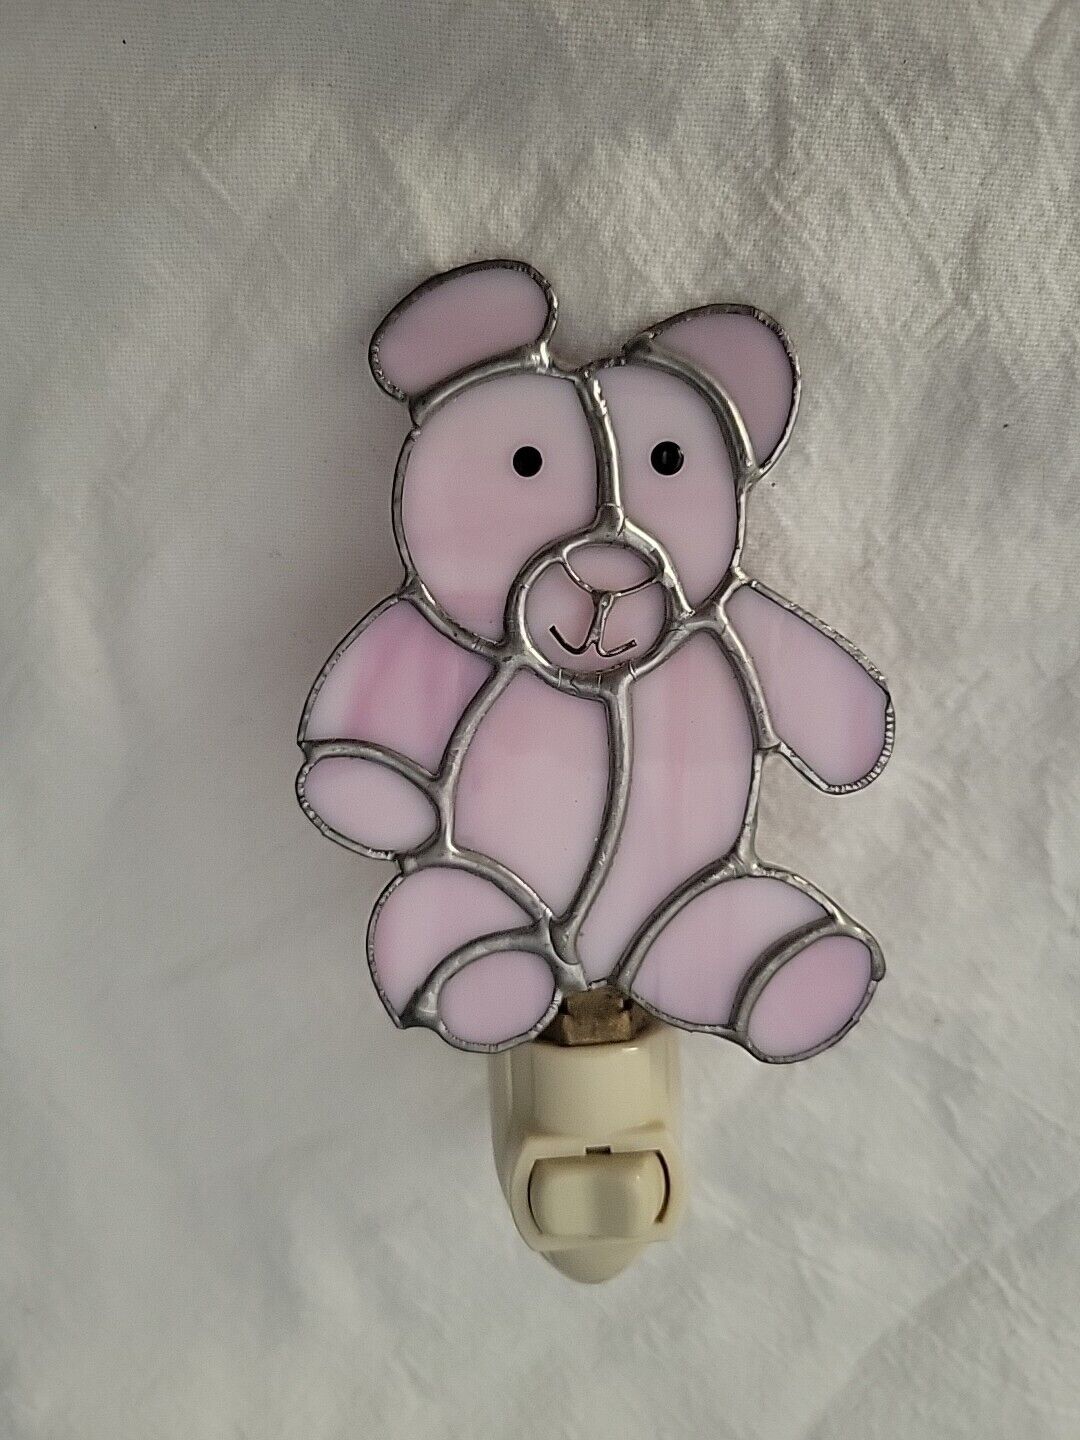 Vintage Stained Glass Teddy Bear Nightlight Pink Lavender Color, Super Cute